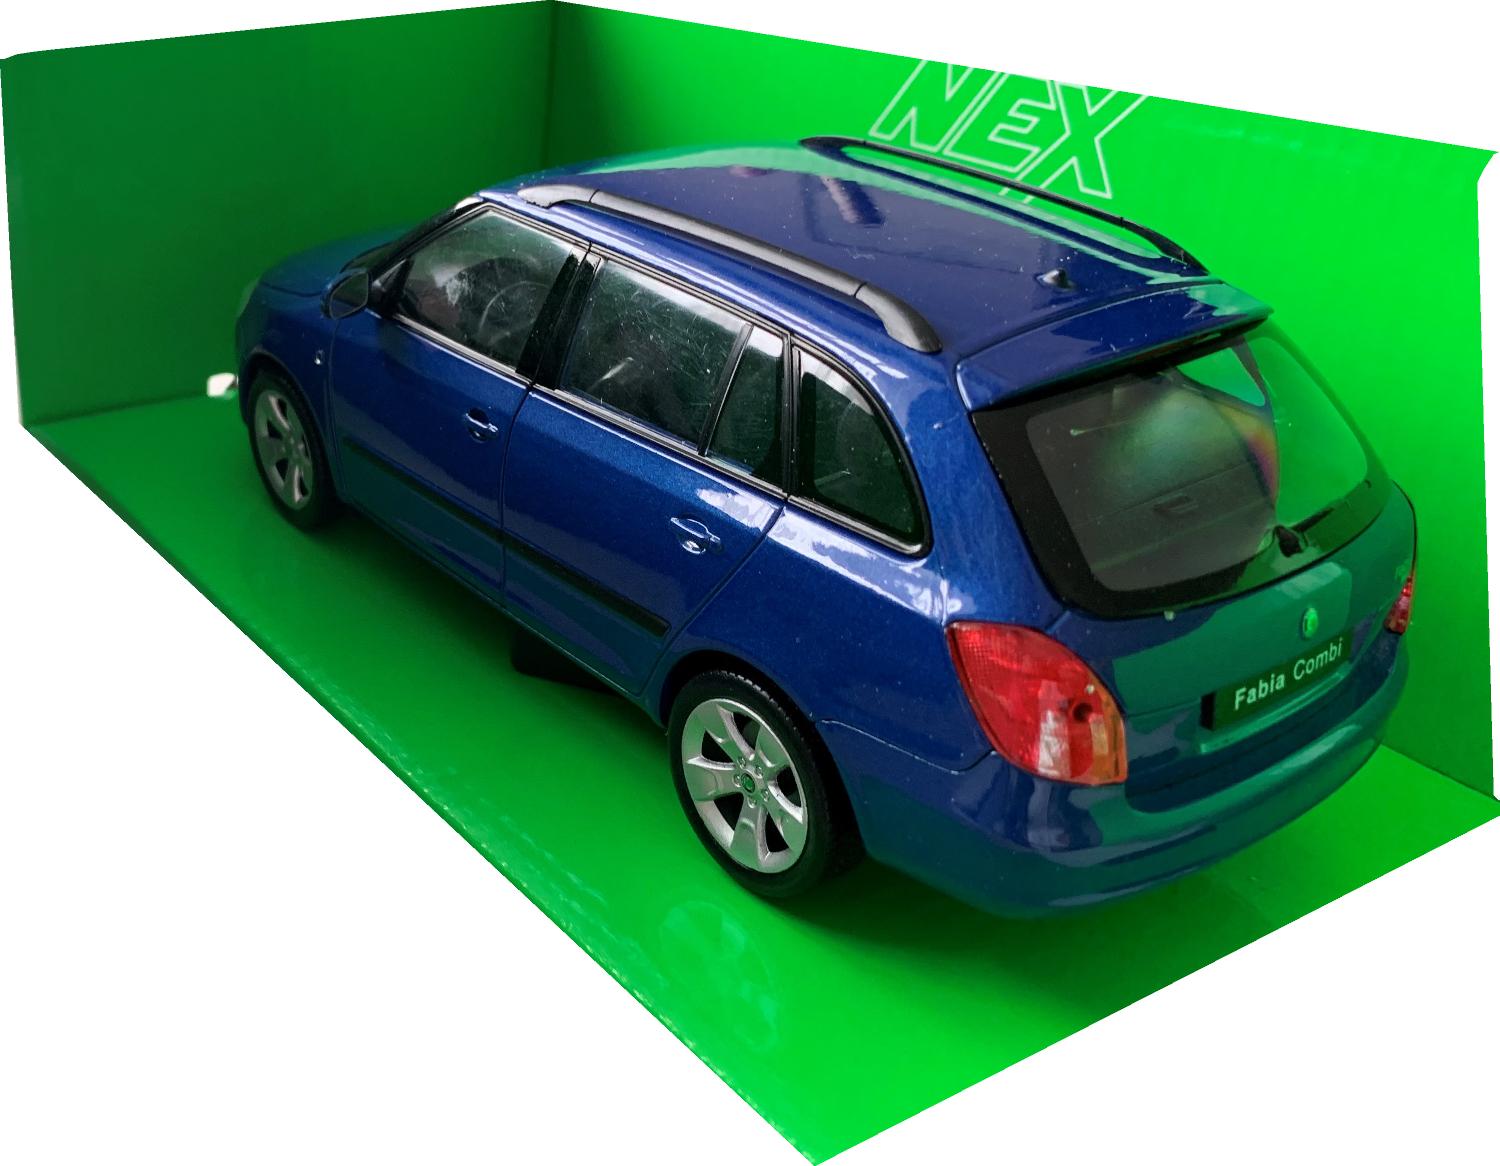 n excellent scale model of a Skoda Fabia Combi II decorated in blue with black roof rails and silver wheels